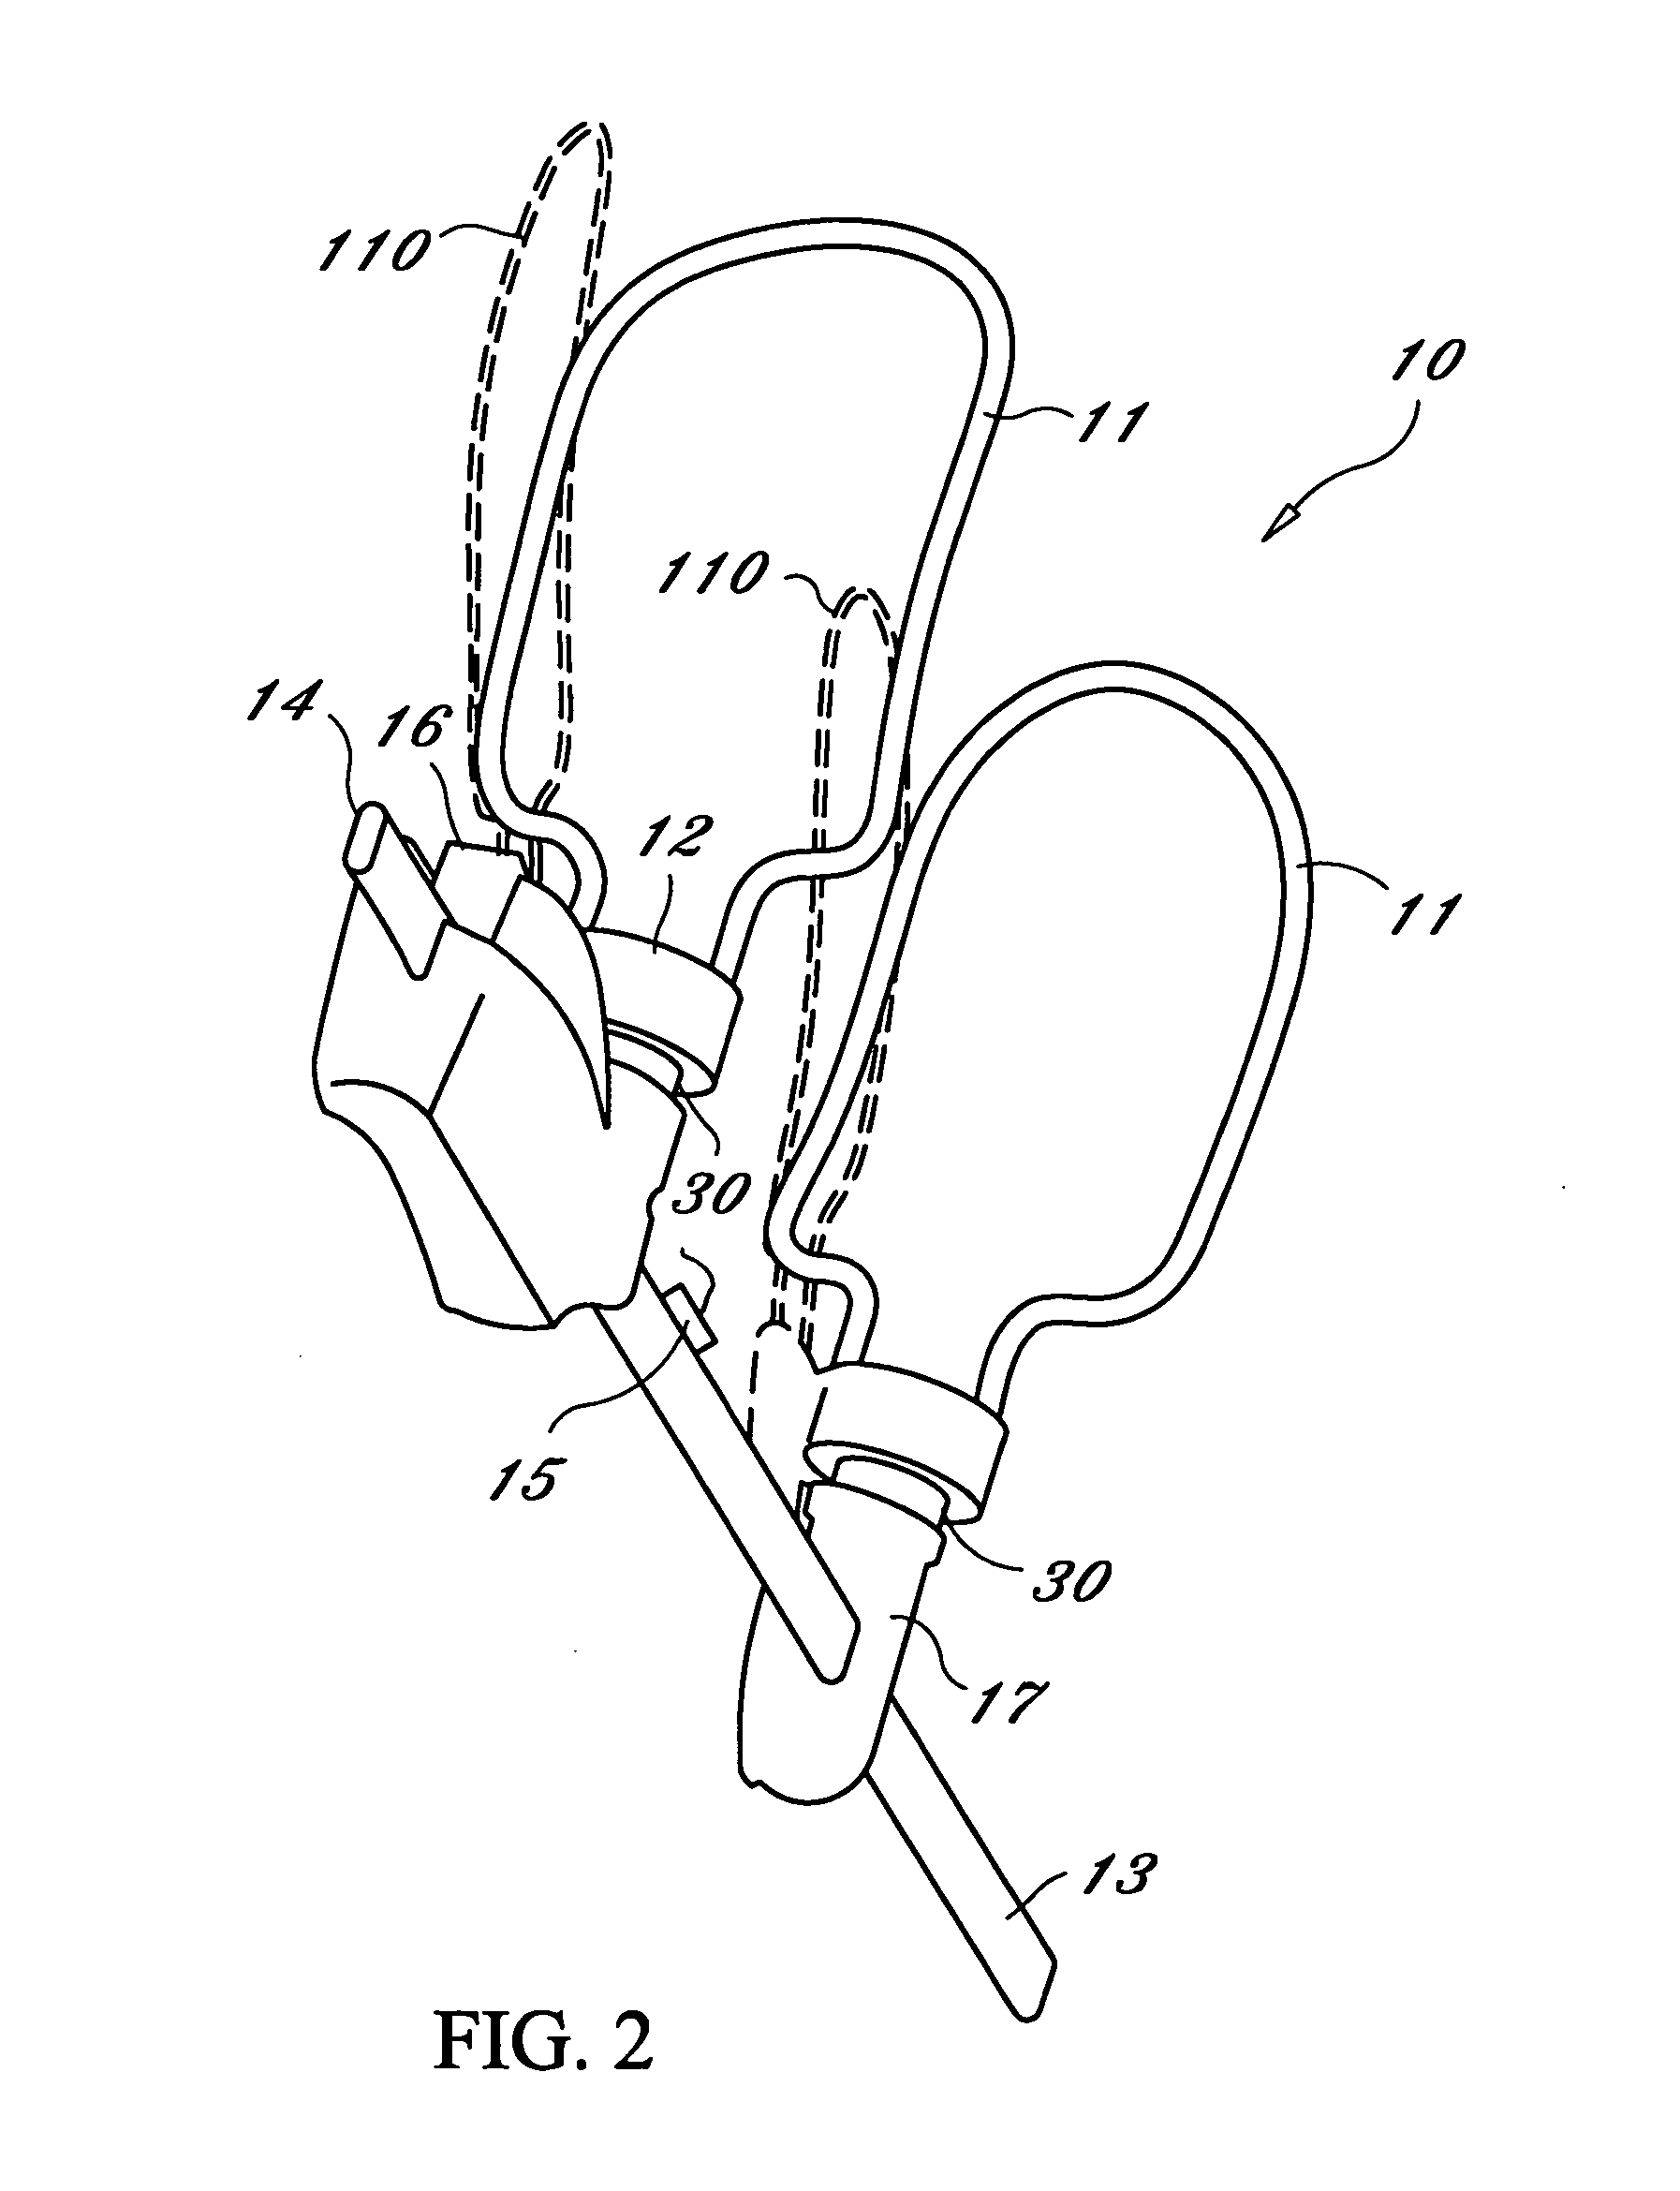 Pelvic waypoint clamp assembly and method